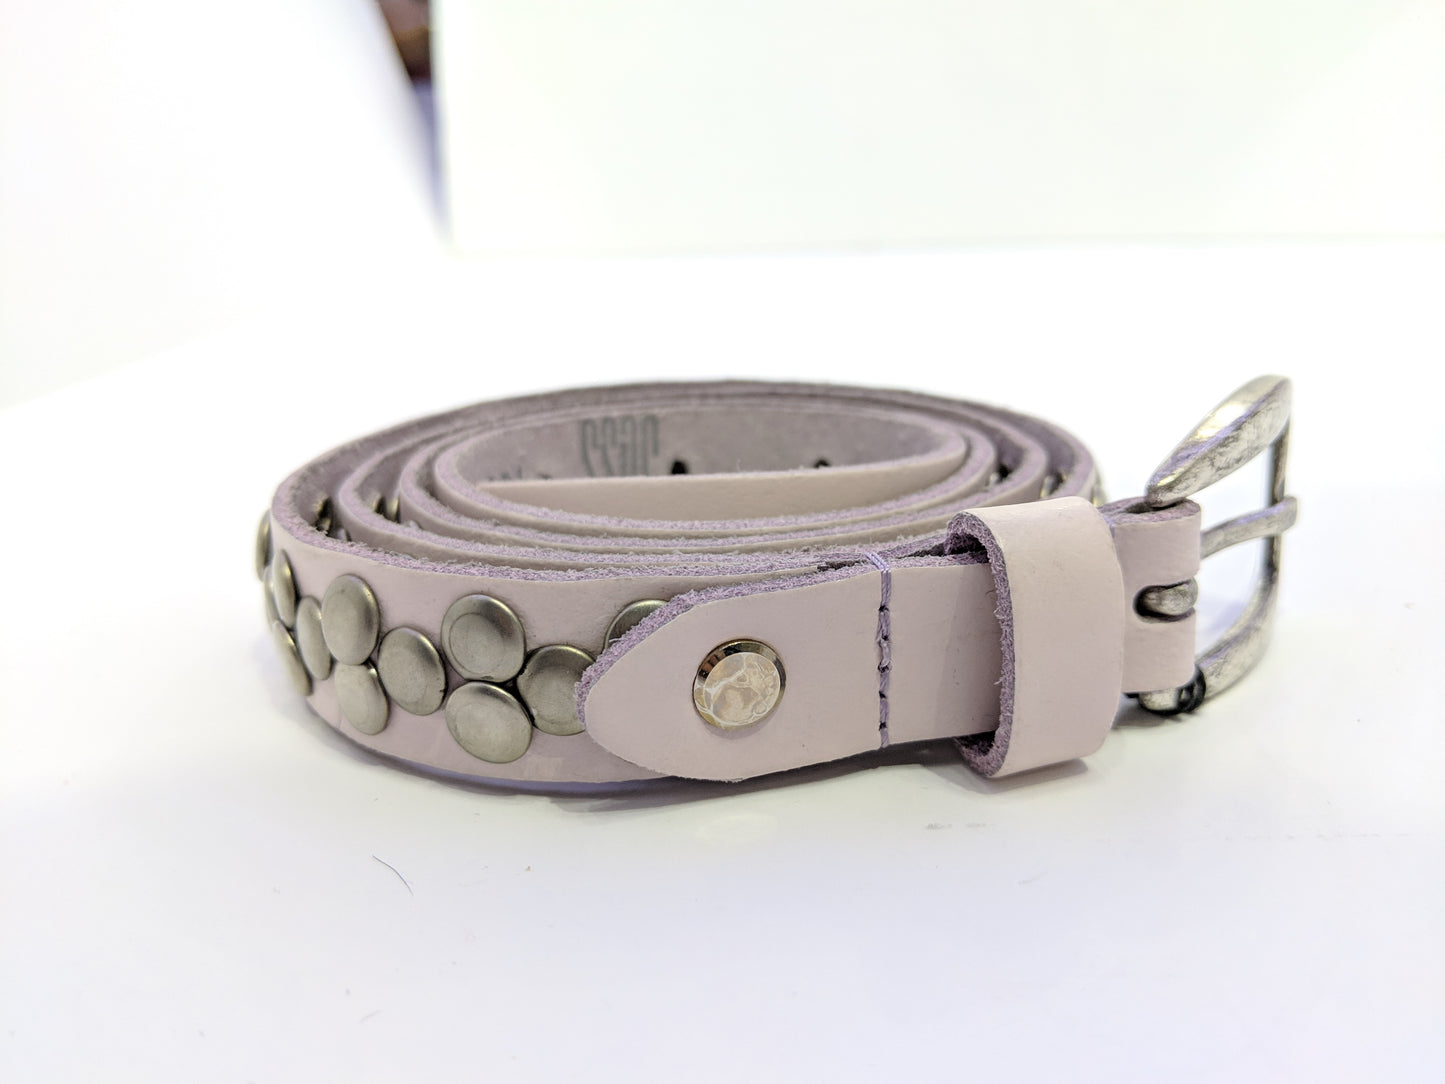 Leather belt with metal embellishments